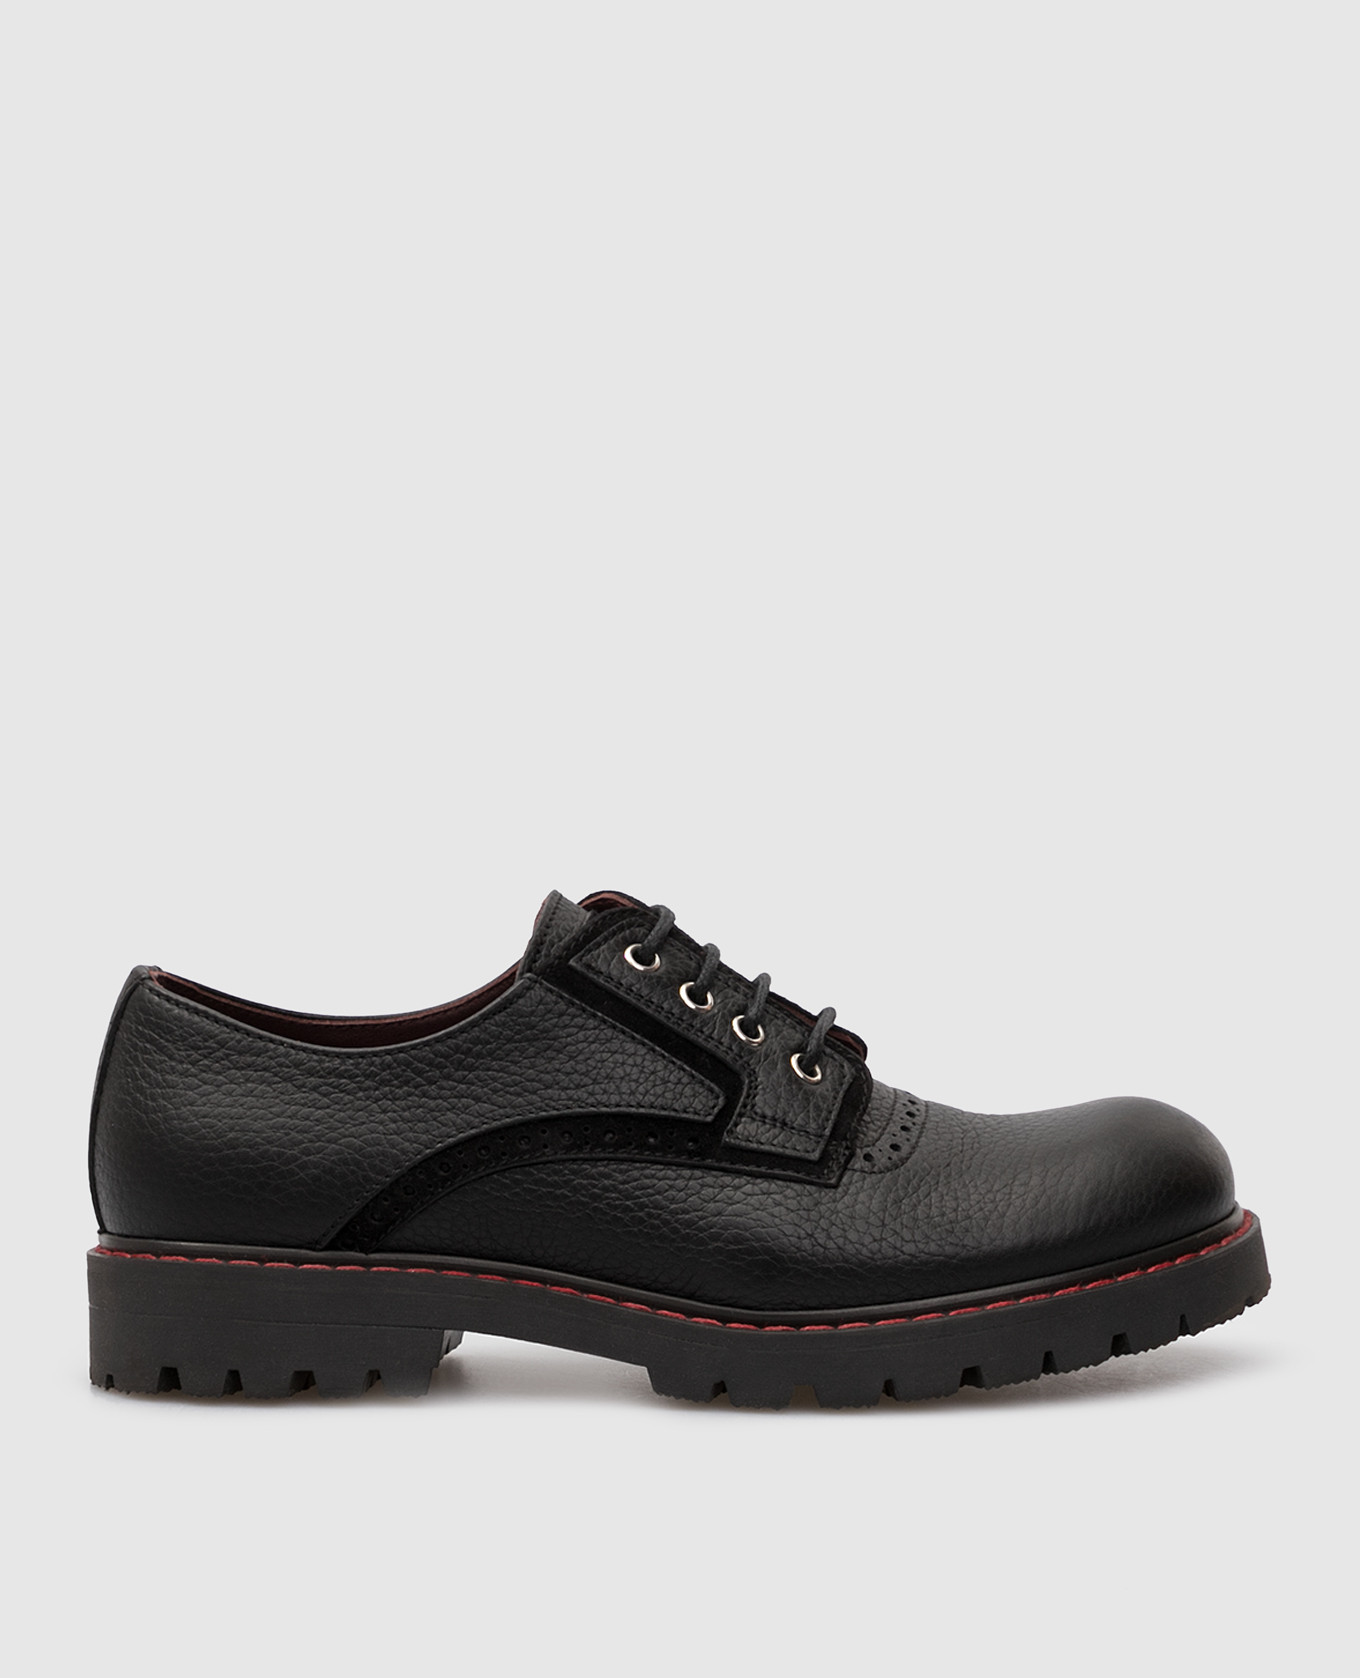 Children's black leather brogues